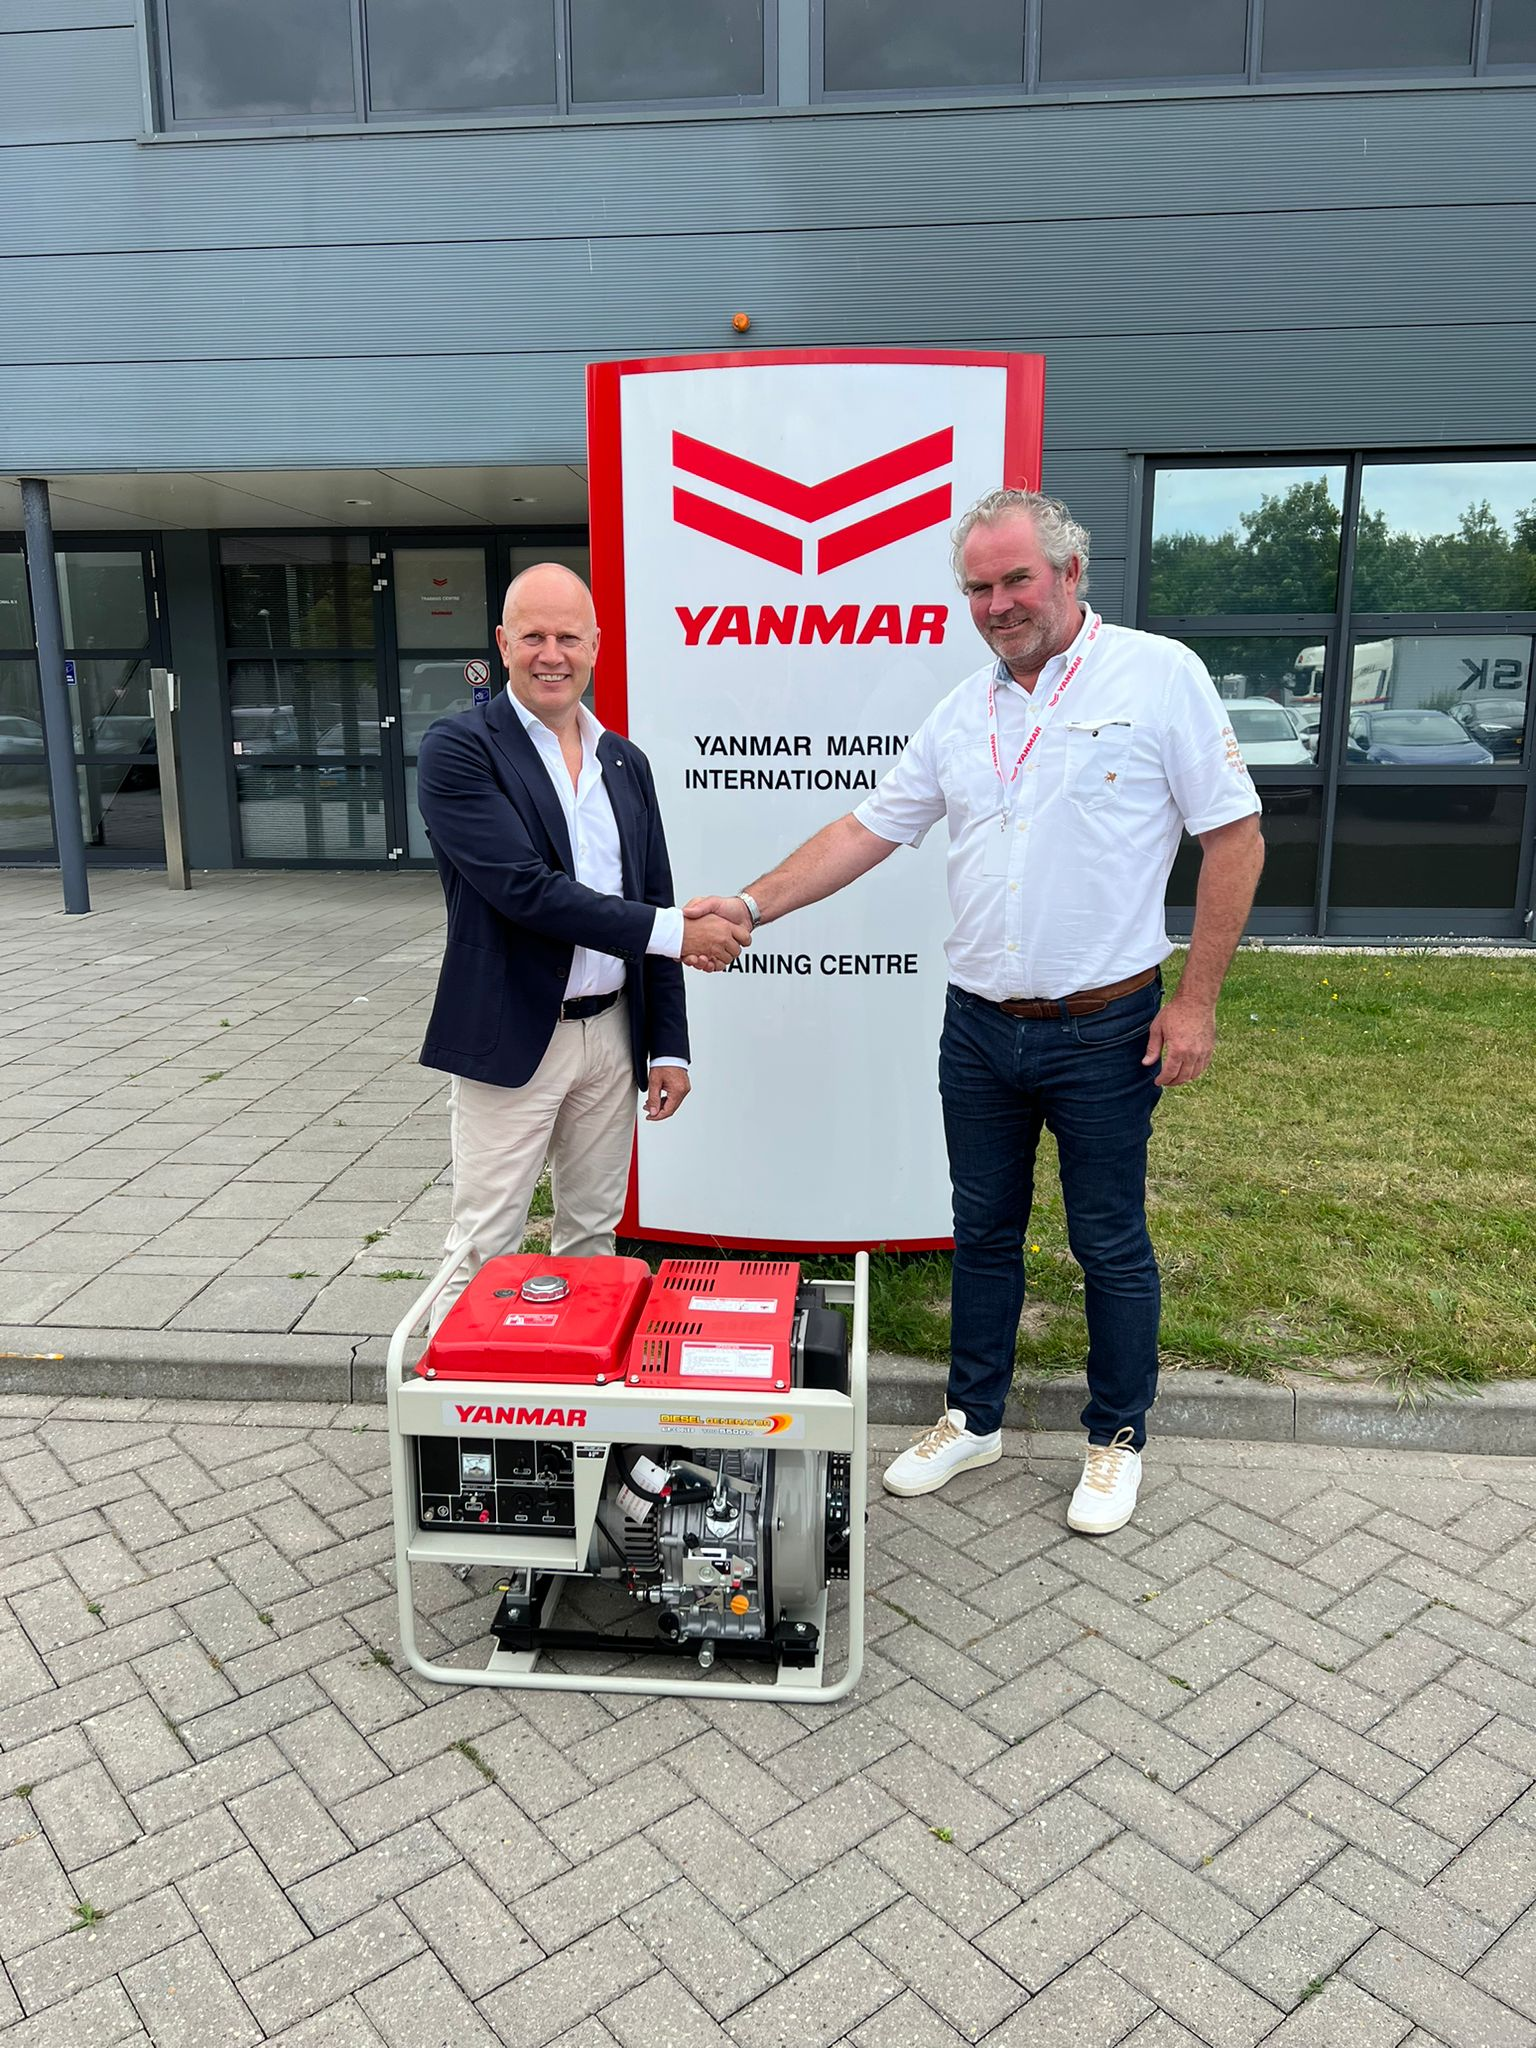 A whopping 8 generators donated by Yanmar